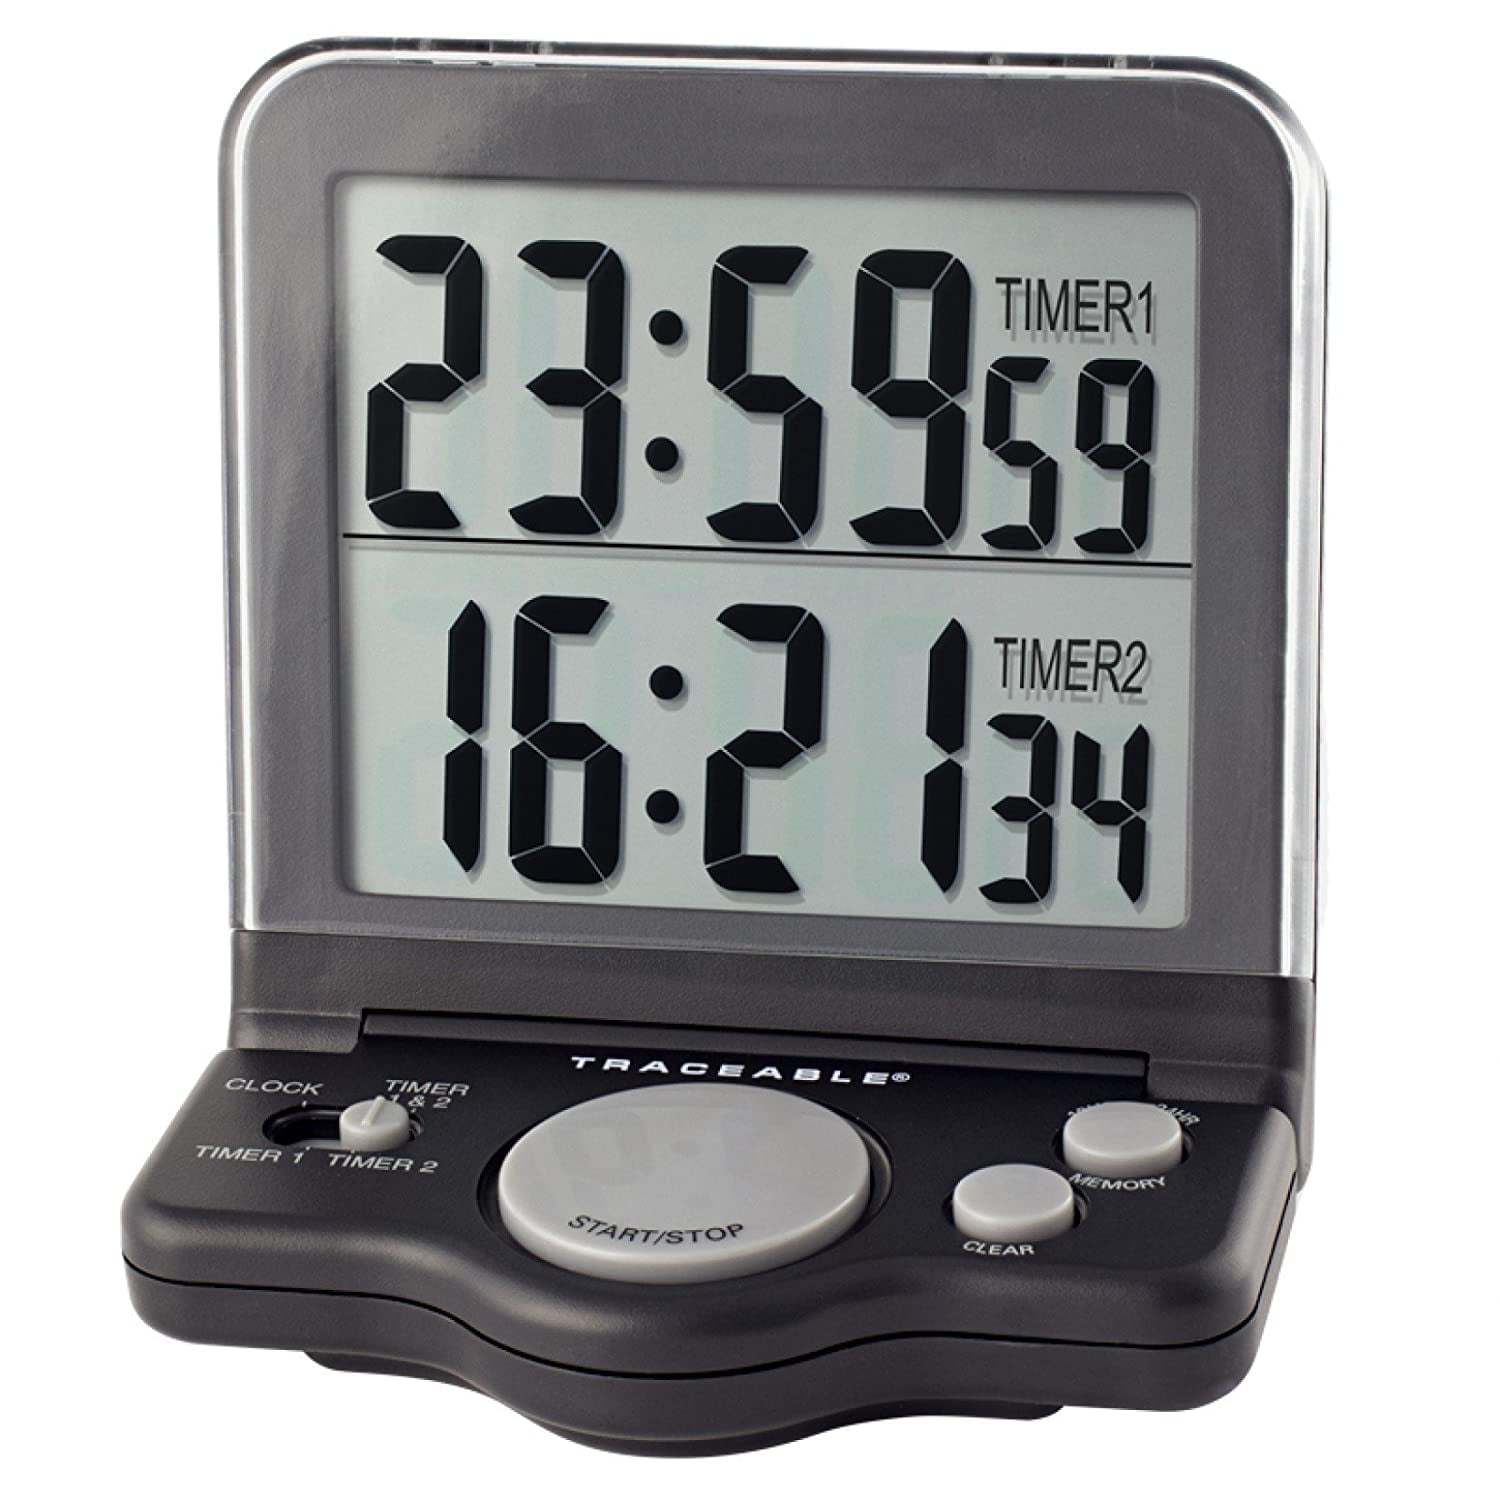 Control Company 5022 Traceable Jumbo Timer, Product Type: LAB SUPPLY By Brand CONTROL